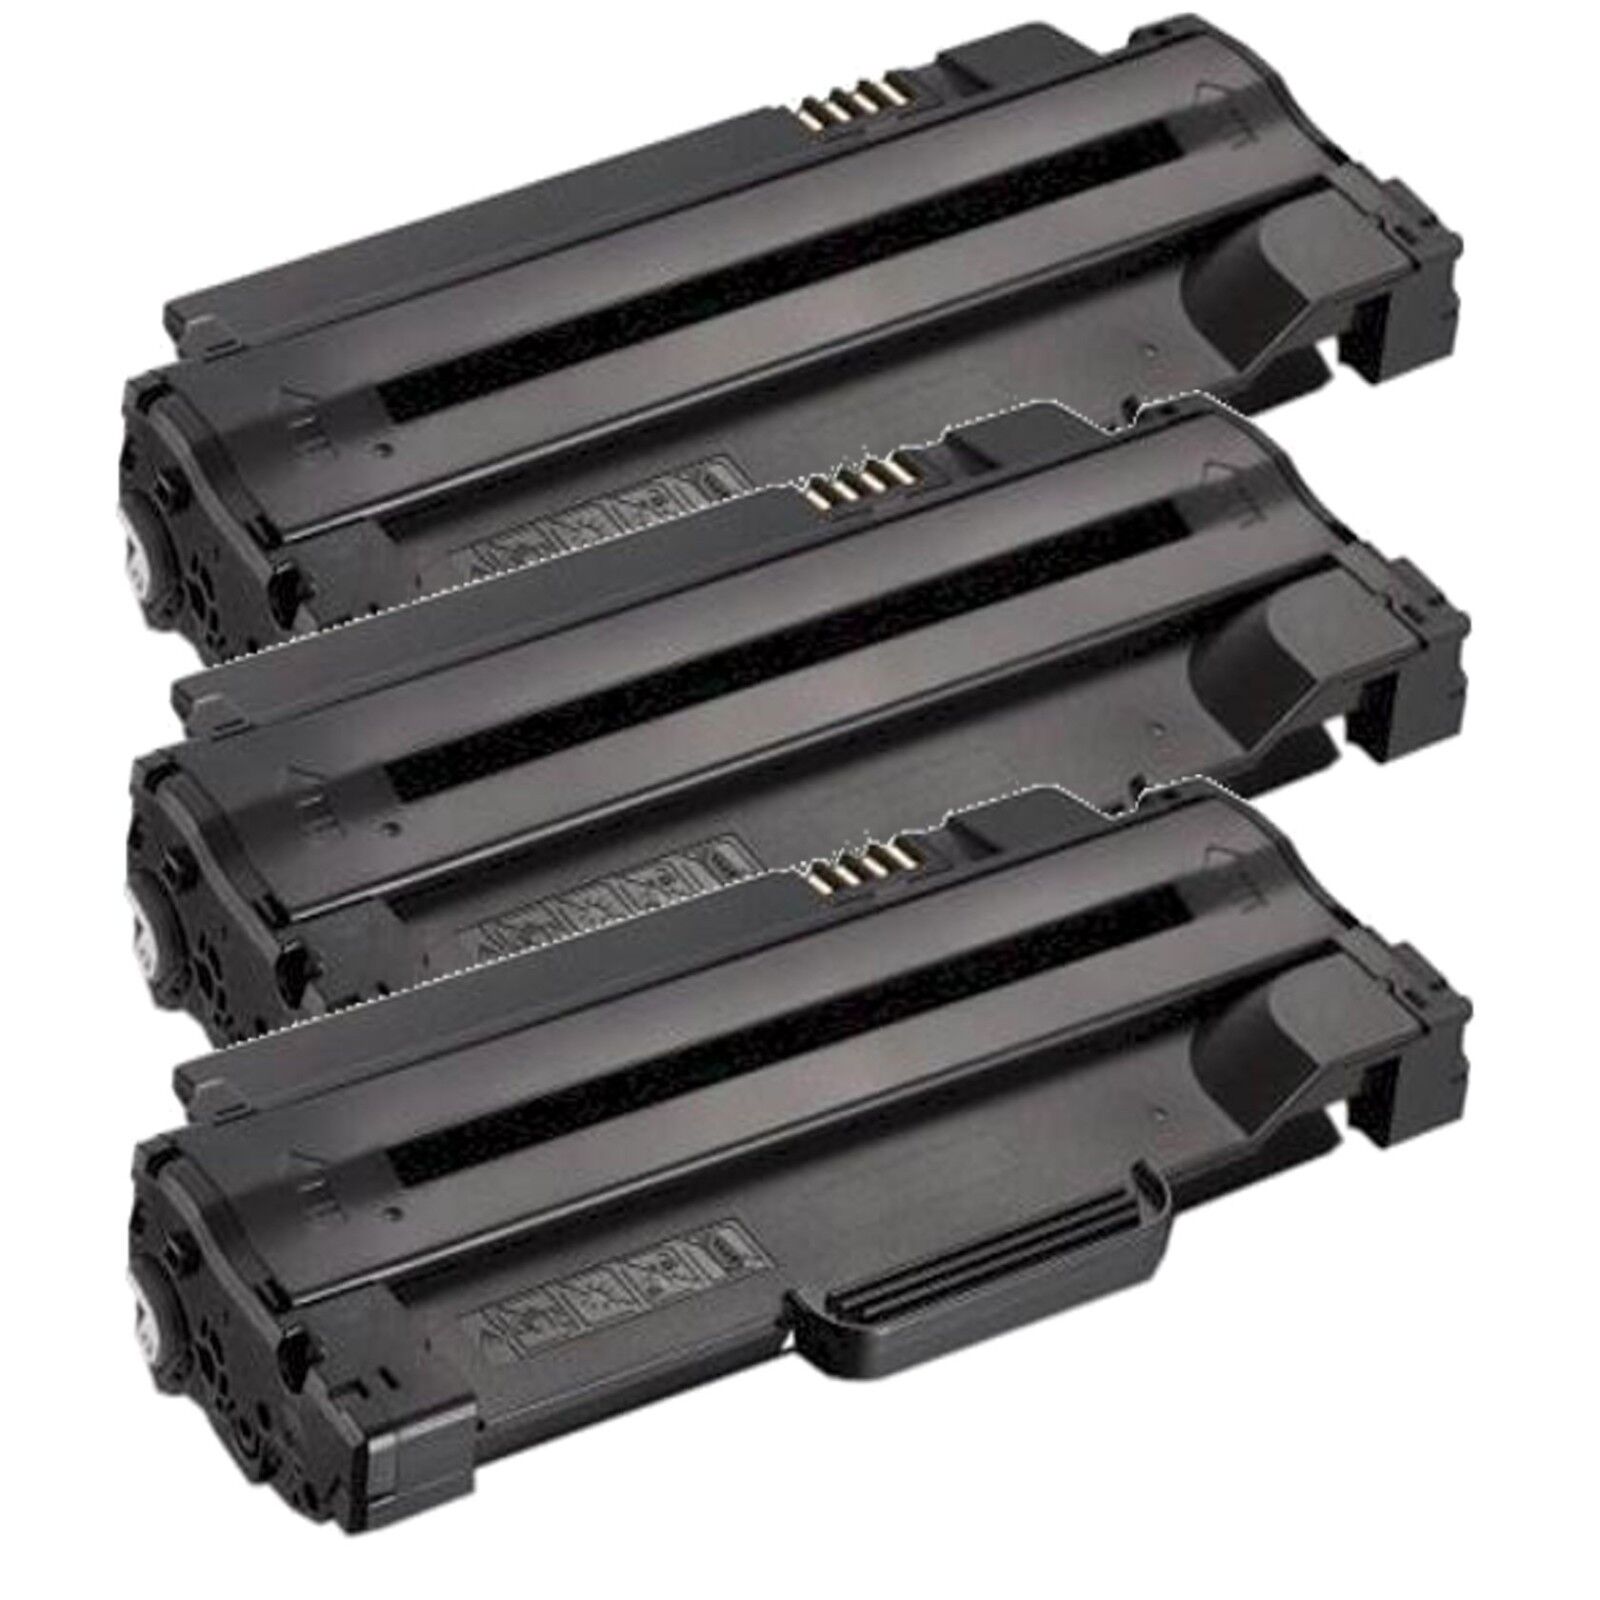 3 pk Dell 330-9523 (7H53W) Compatible Toner Cartridge for 1130 1130n 1133 1135n